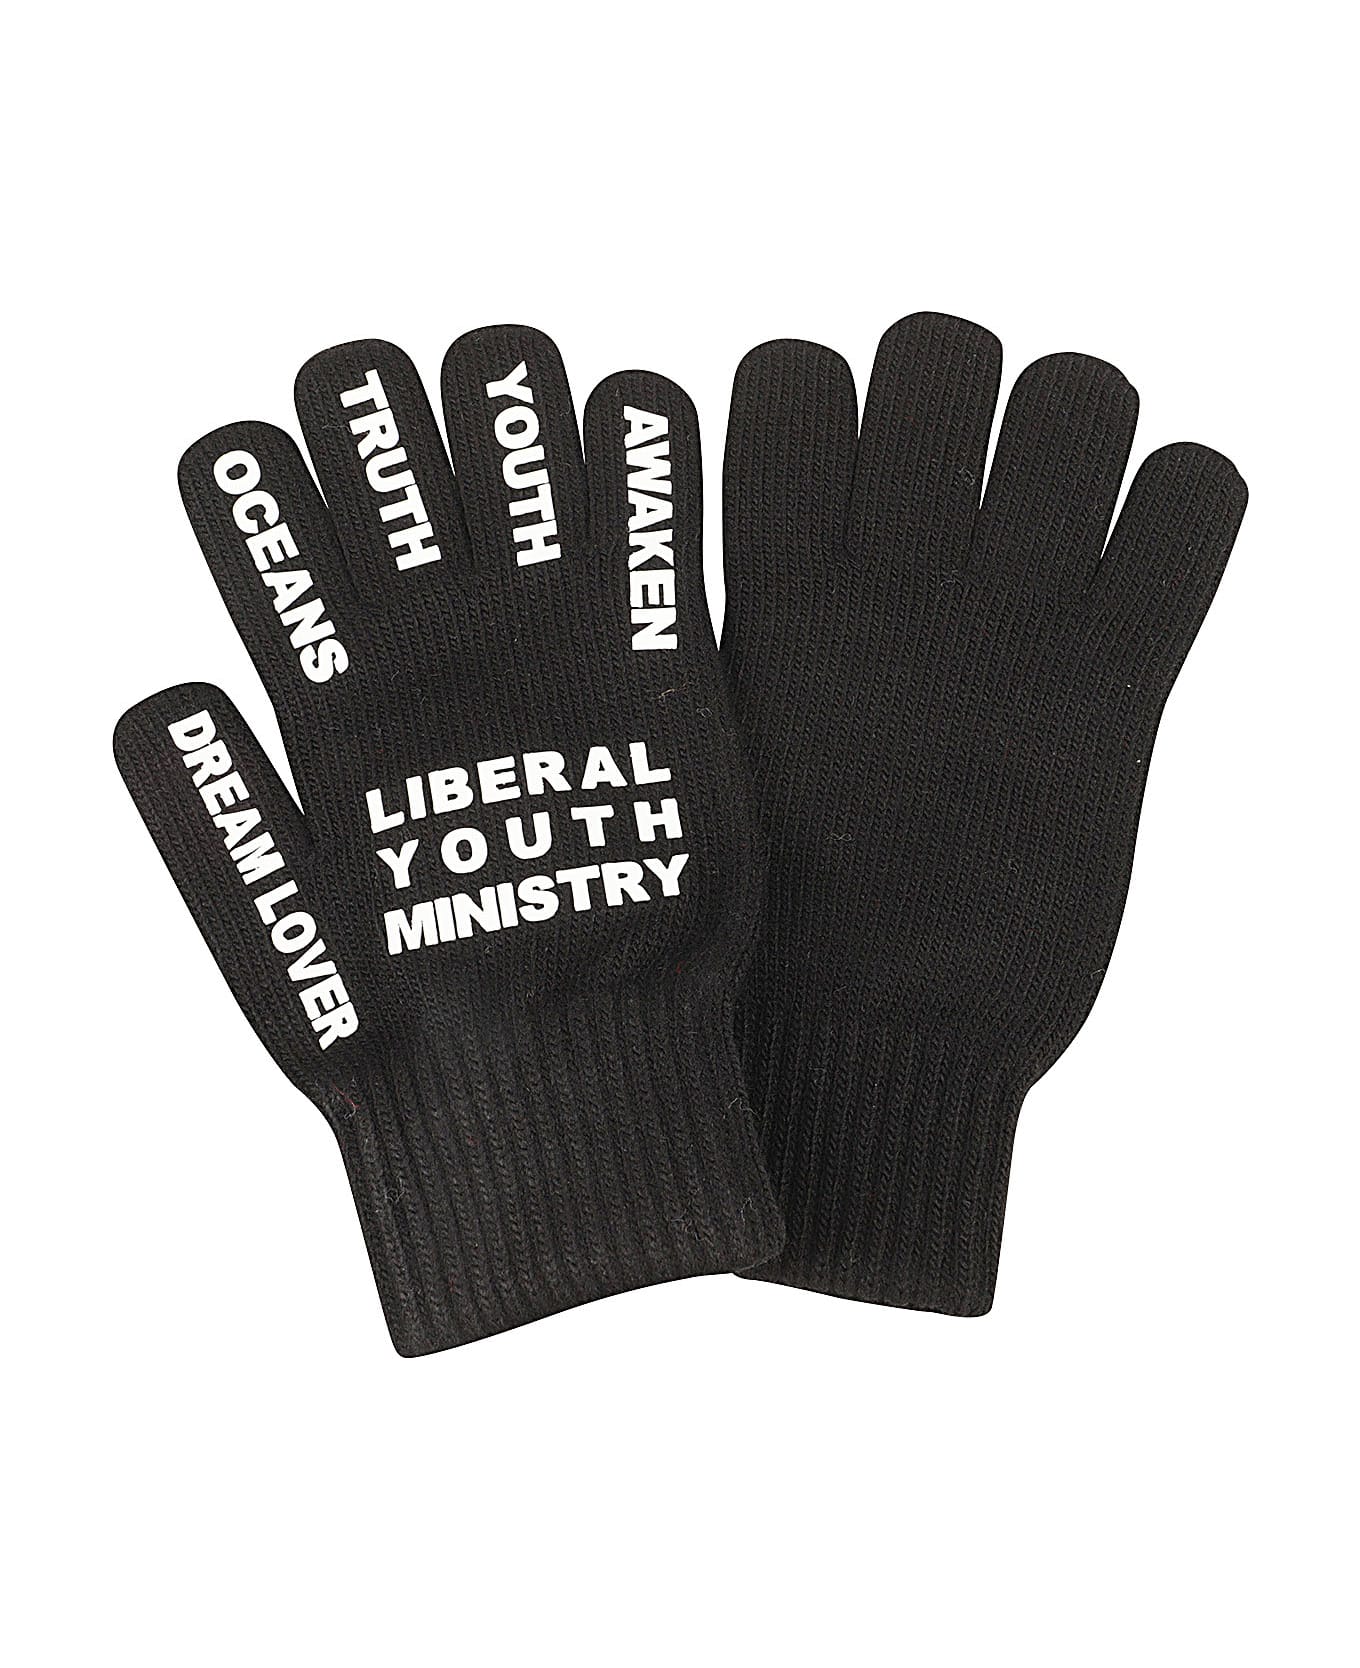 Gloves from Liberal Youth Ministry Printed